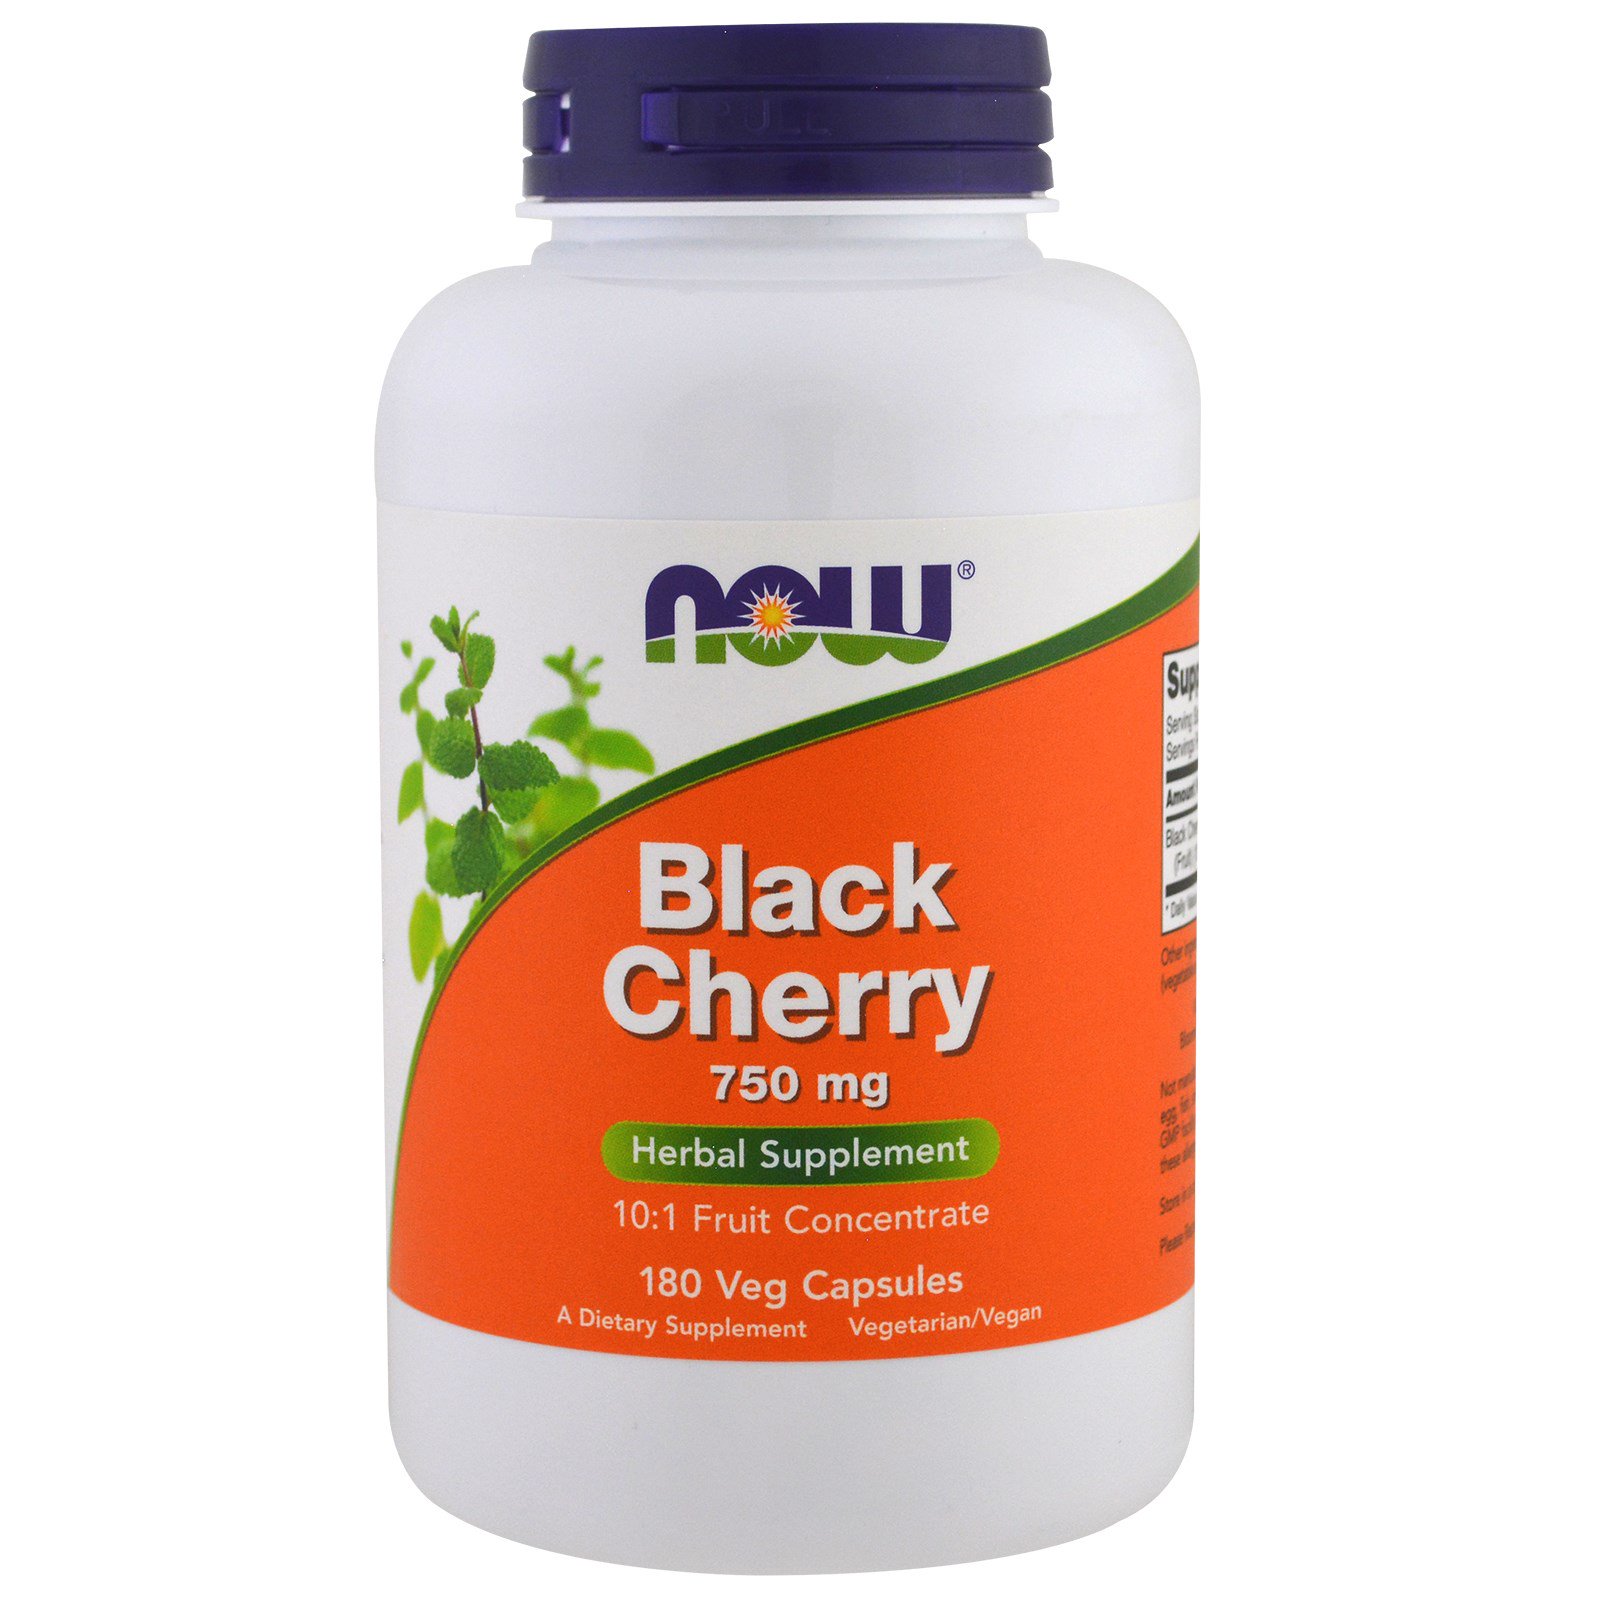 Black cherry tablets for gout